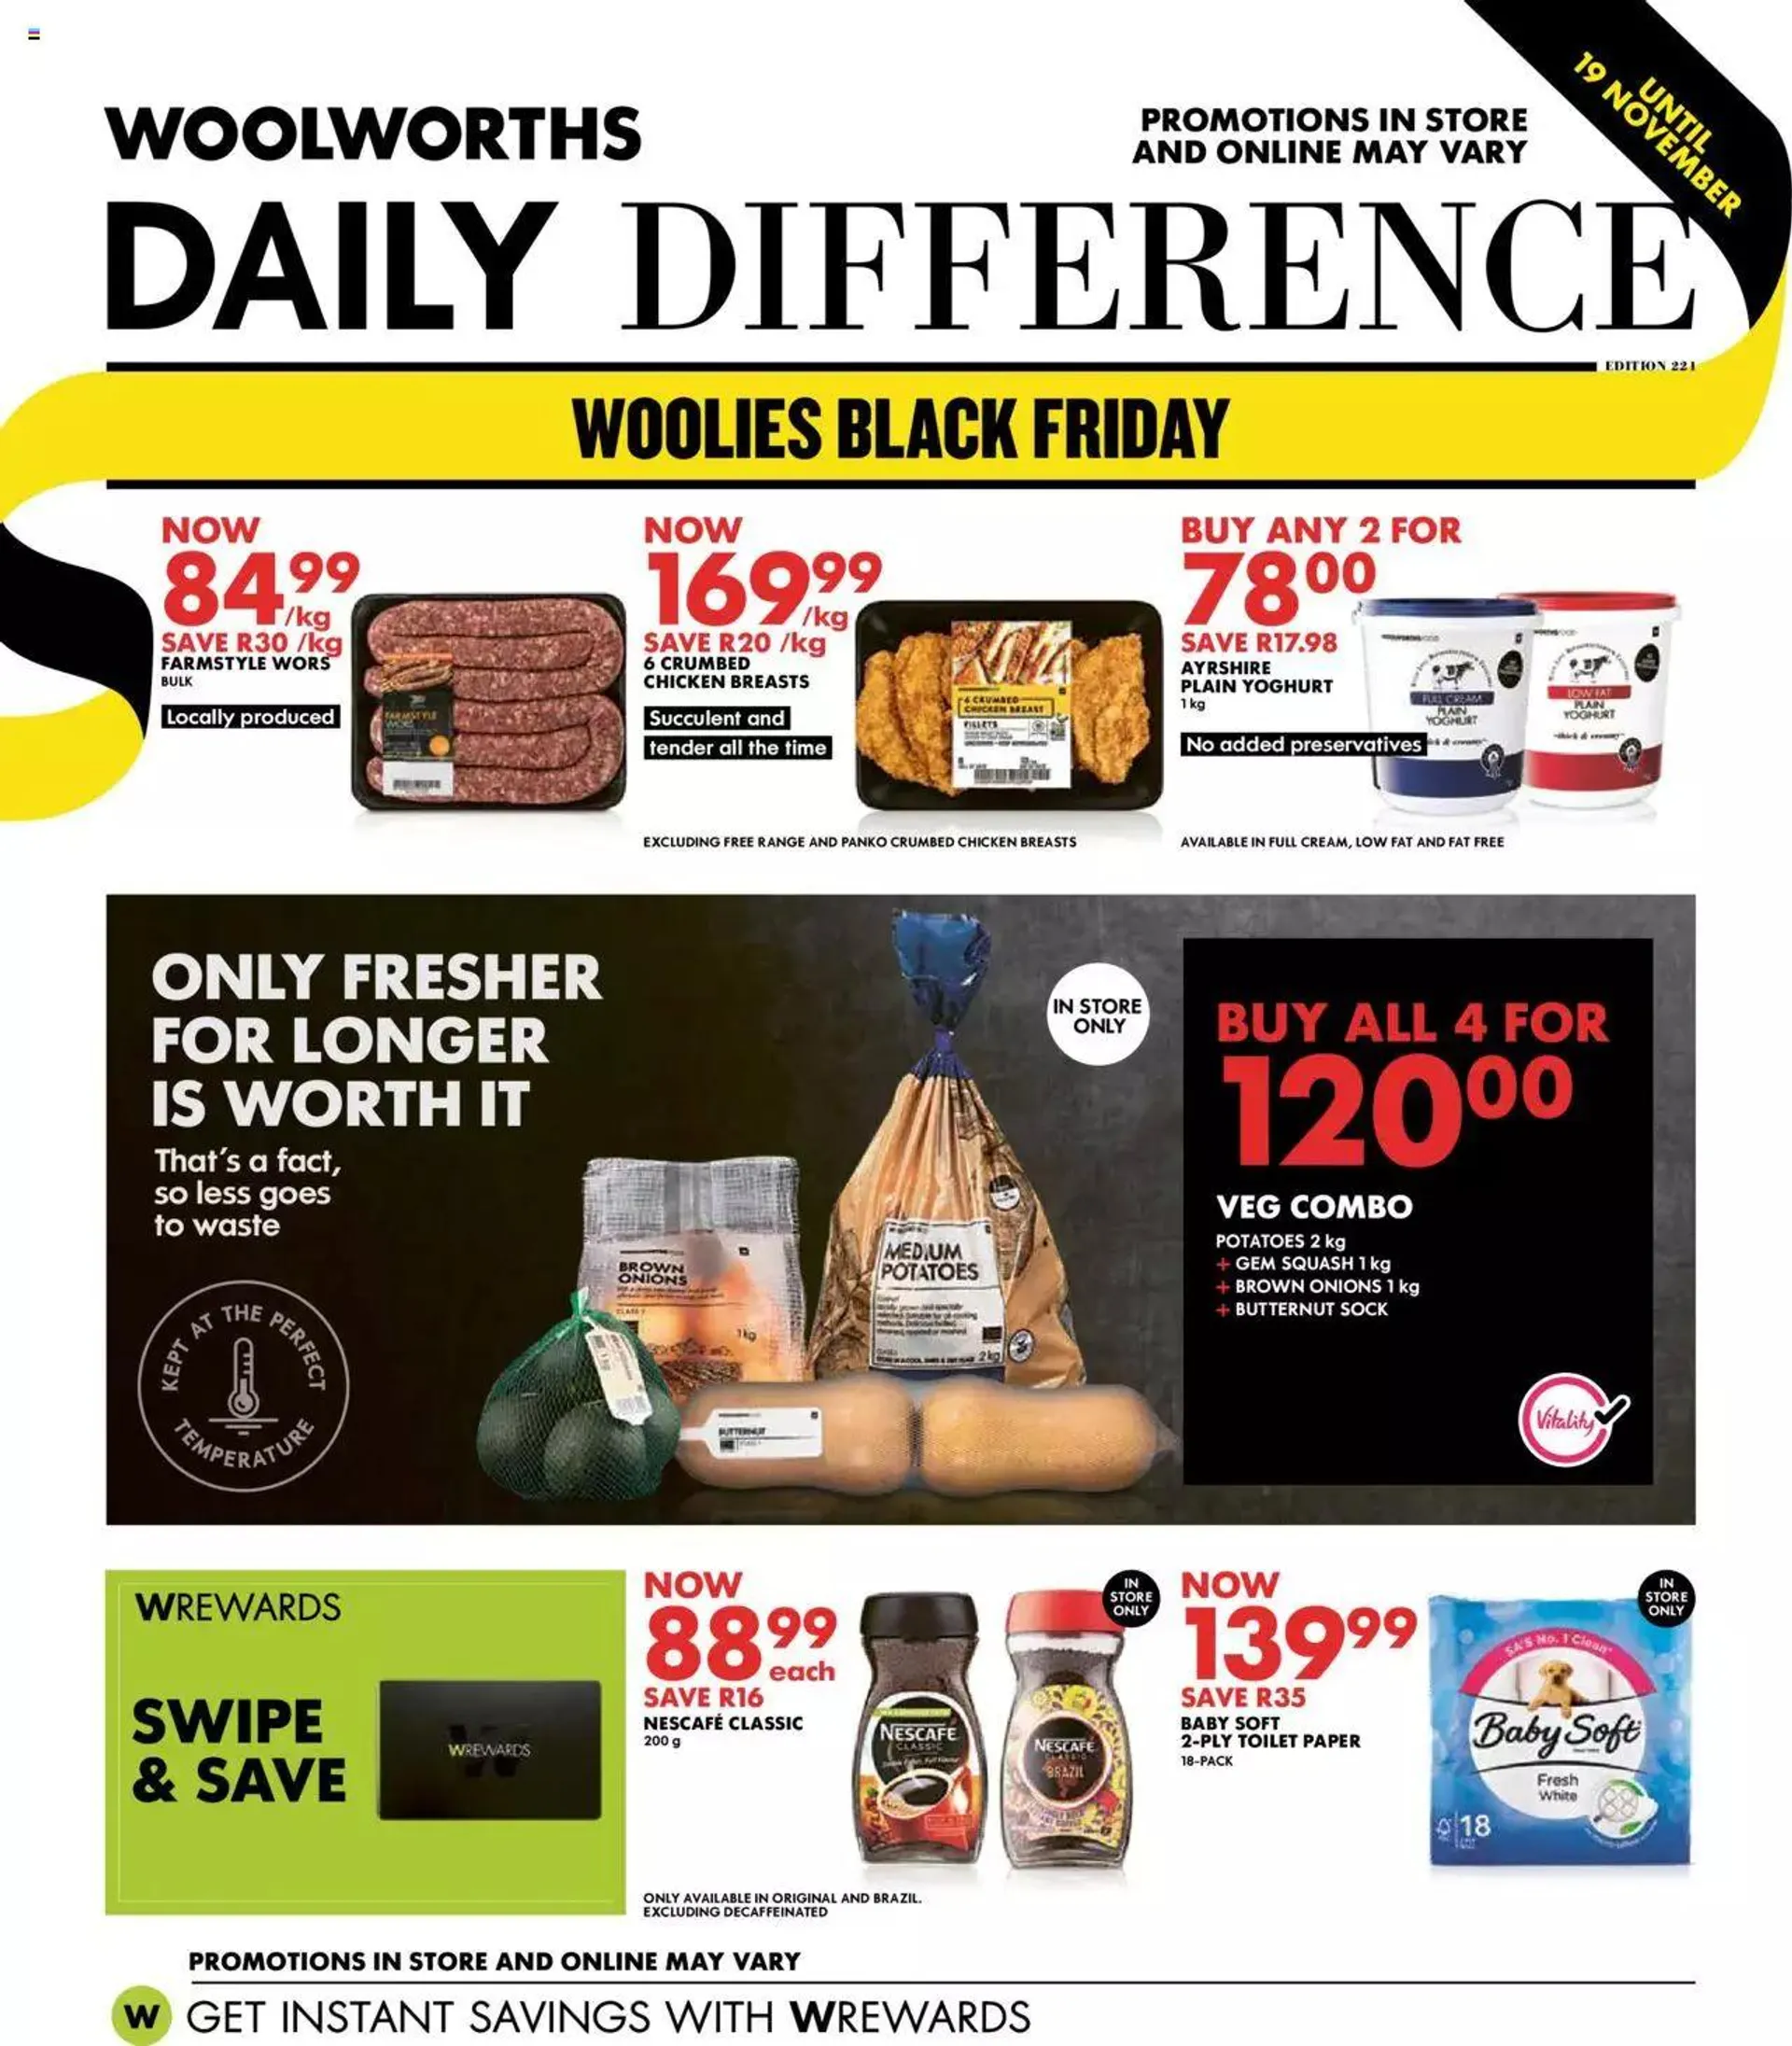 Woolworths Daily Difference - Gauteng